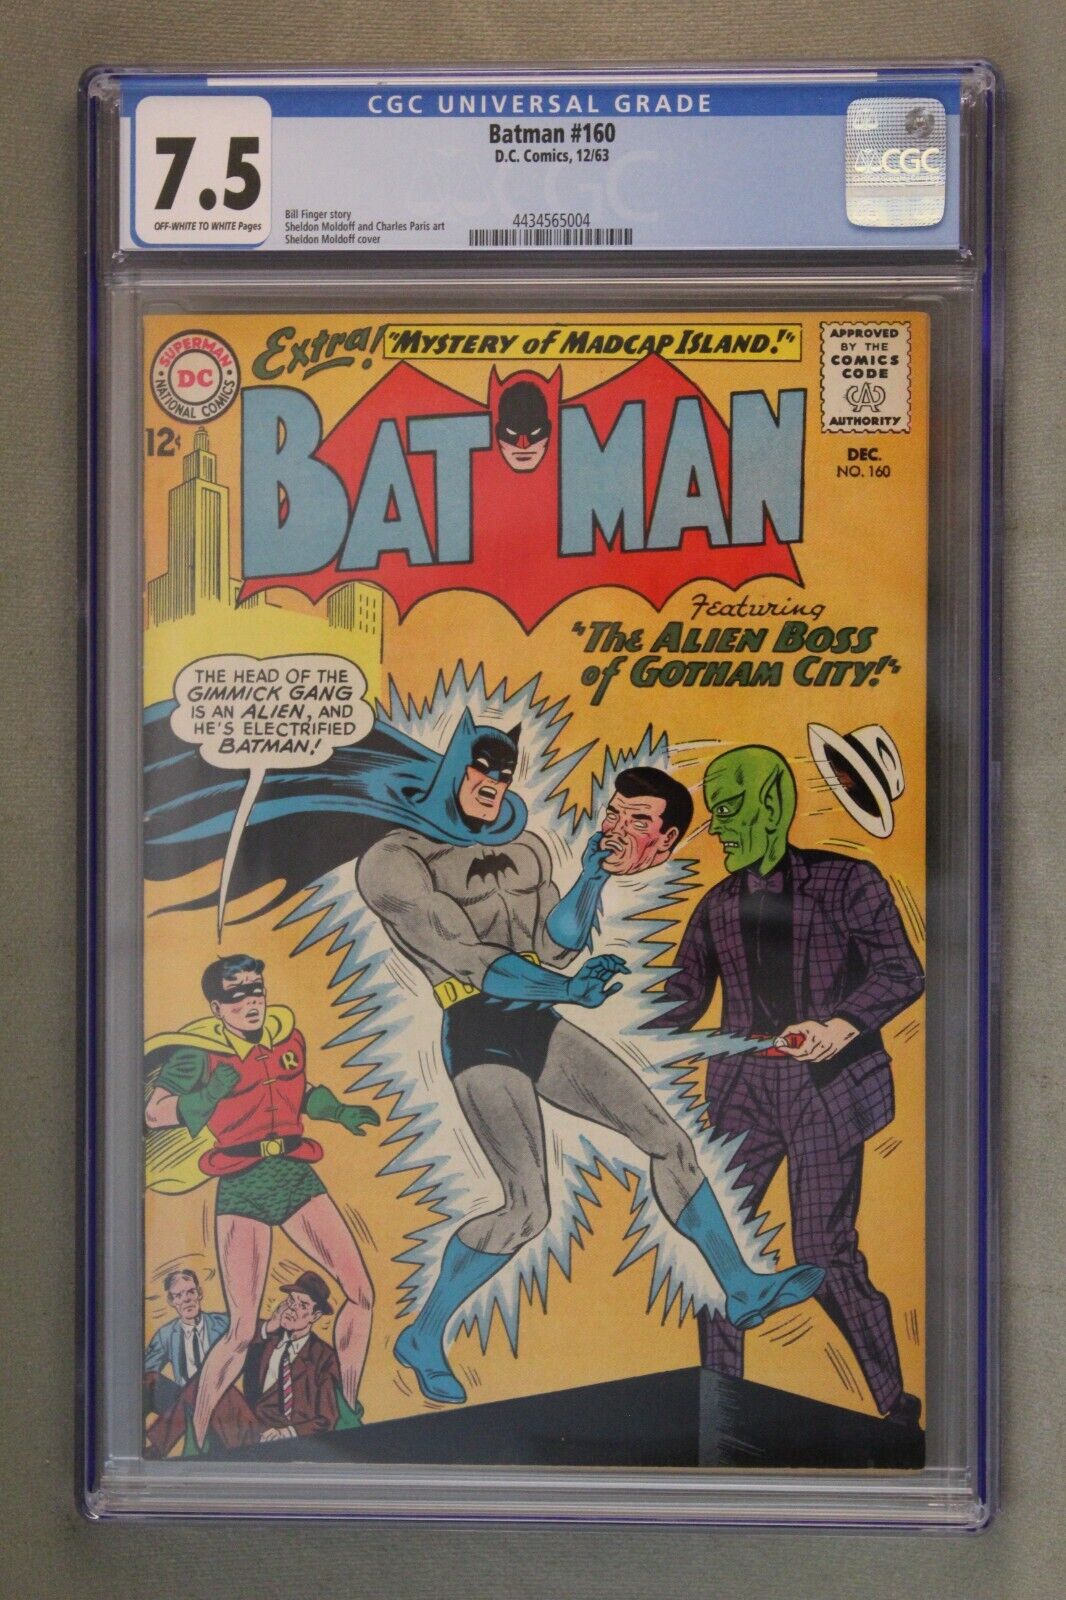 BATMAN #160, D.C. Comics, 12/63 ~ CGC Graded at 7.5 ~ Off-White To White Pages